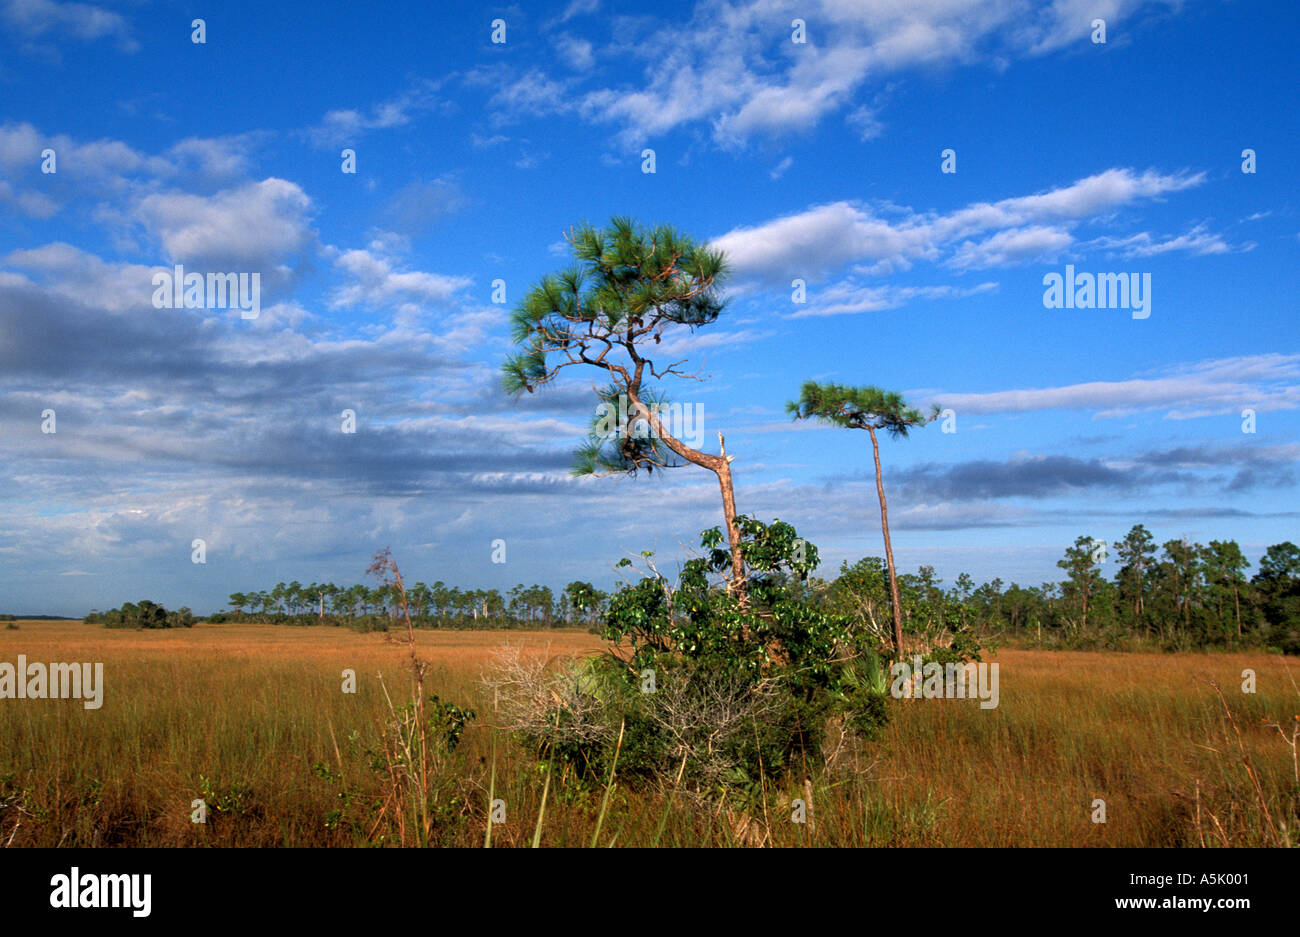 Florida Everglades National Park sawgrass prairie with twisted pine tree in the middle Stock Photo